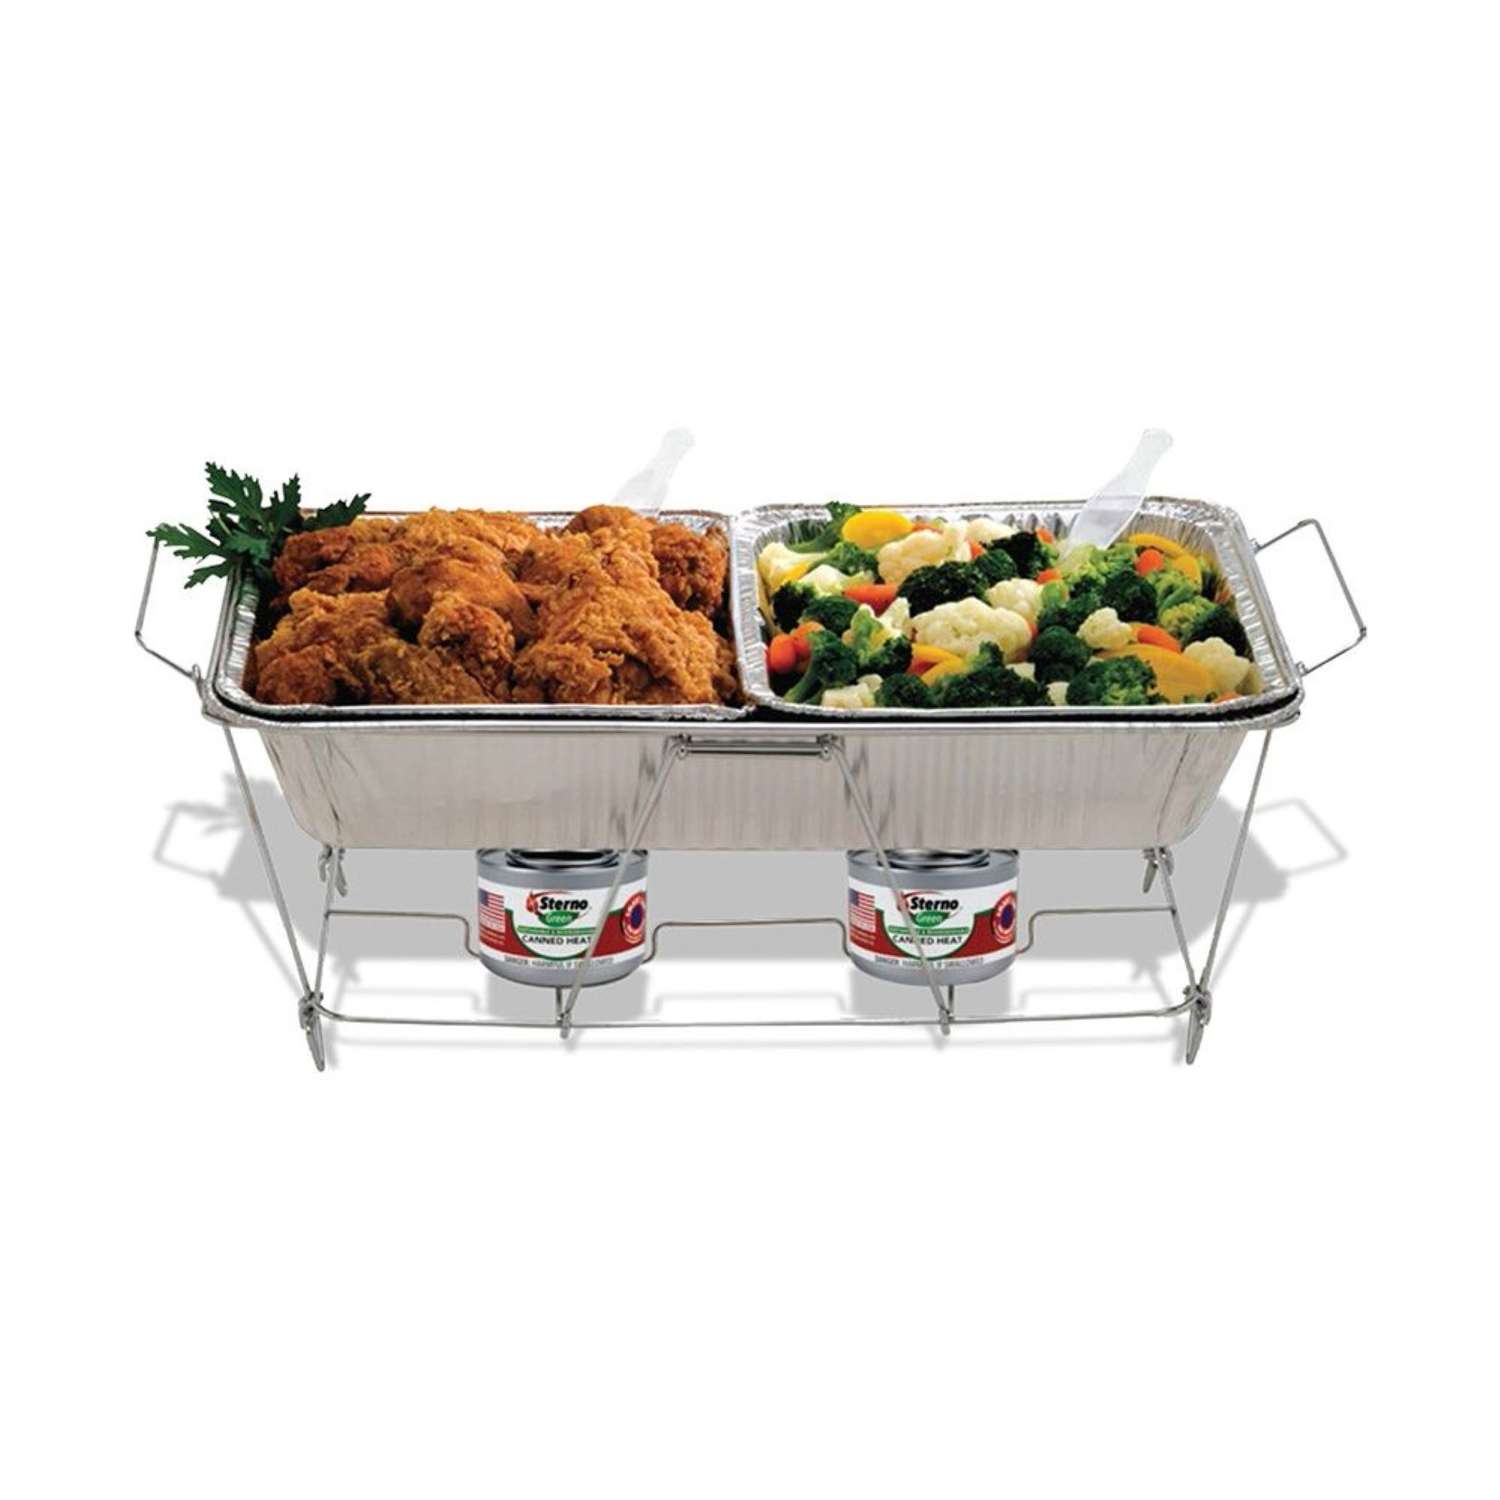 Wire Chafing Dish Rack